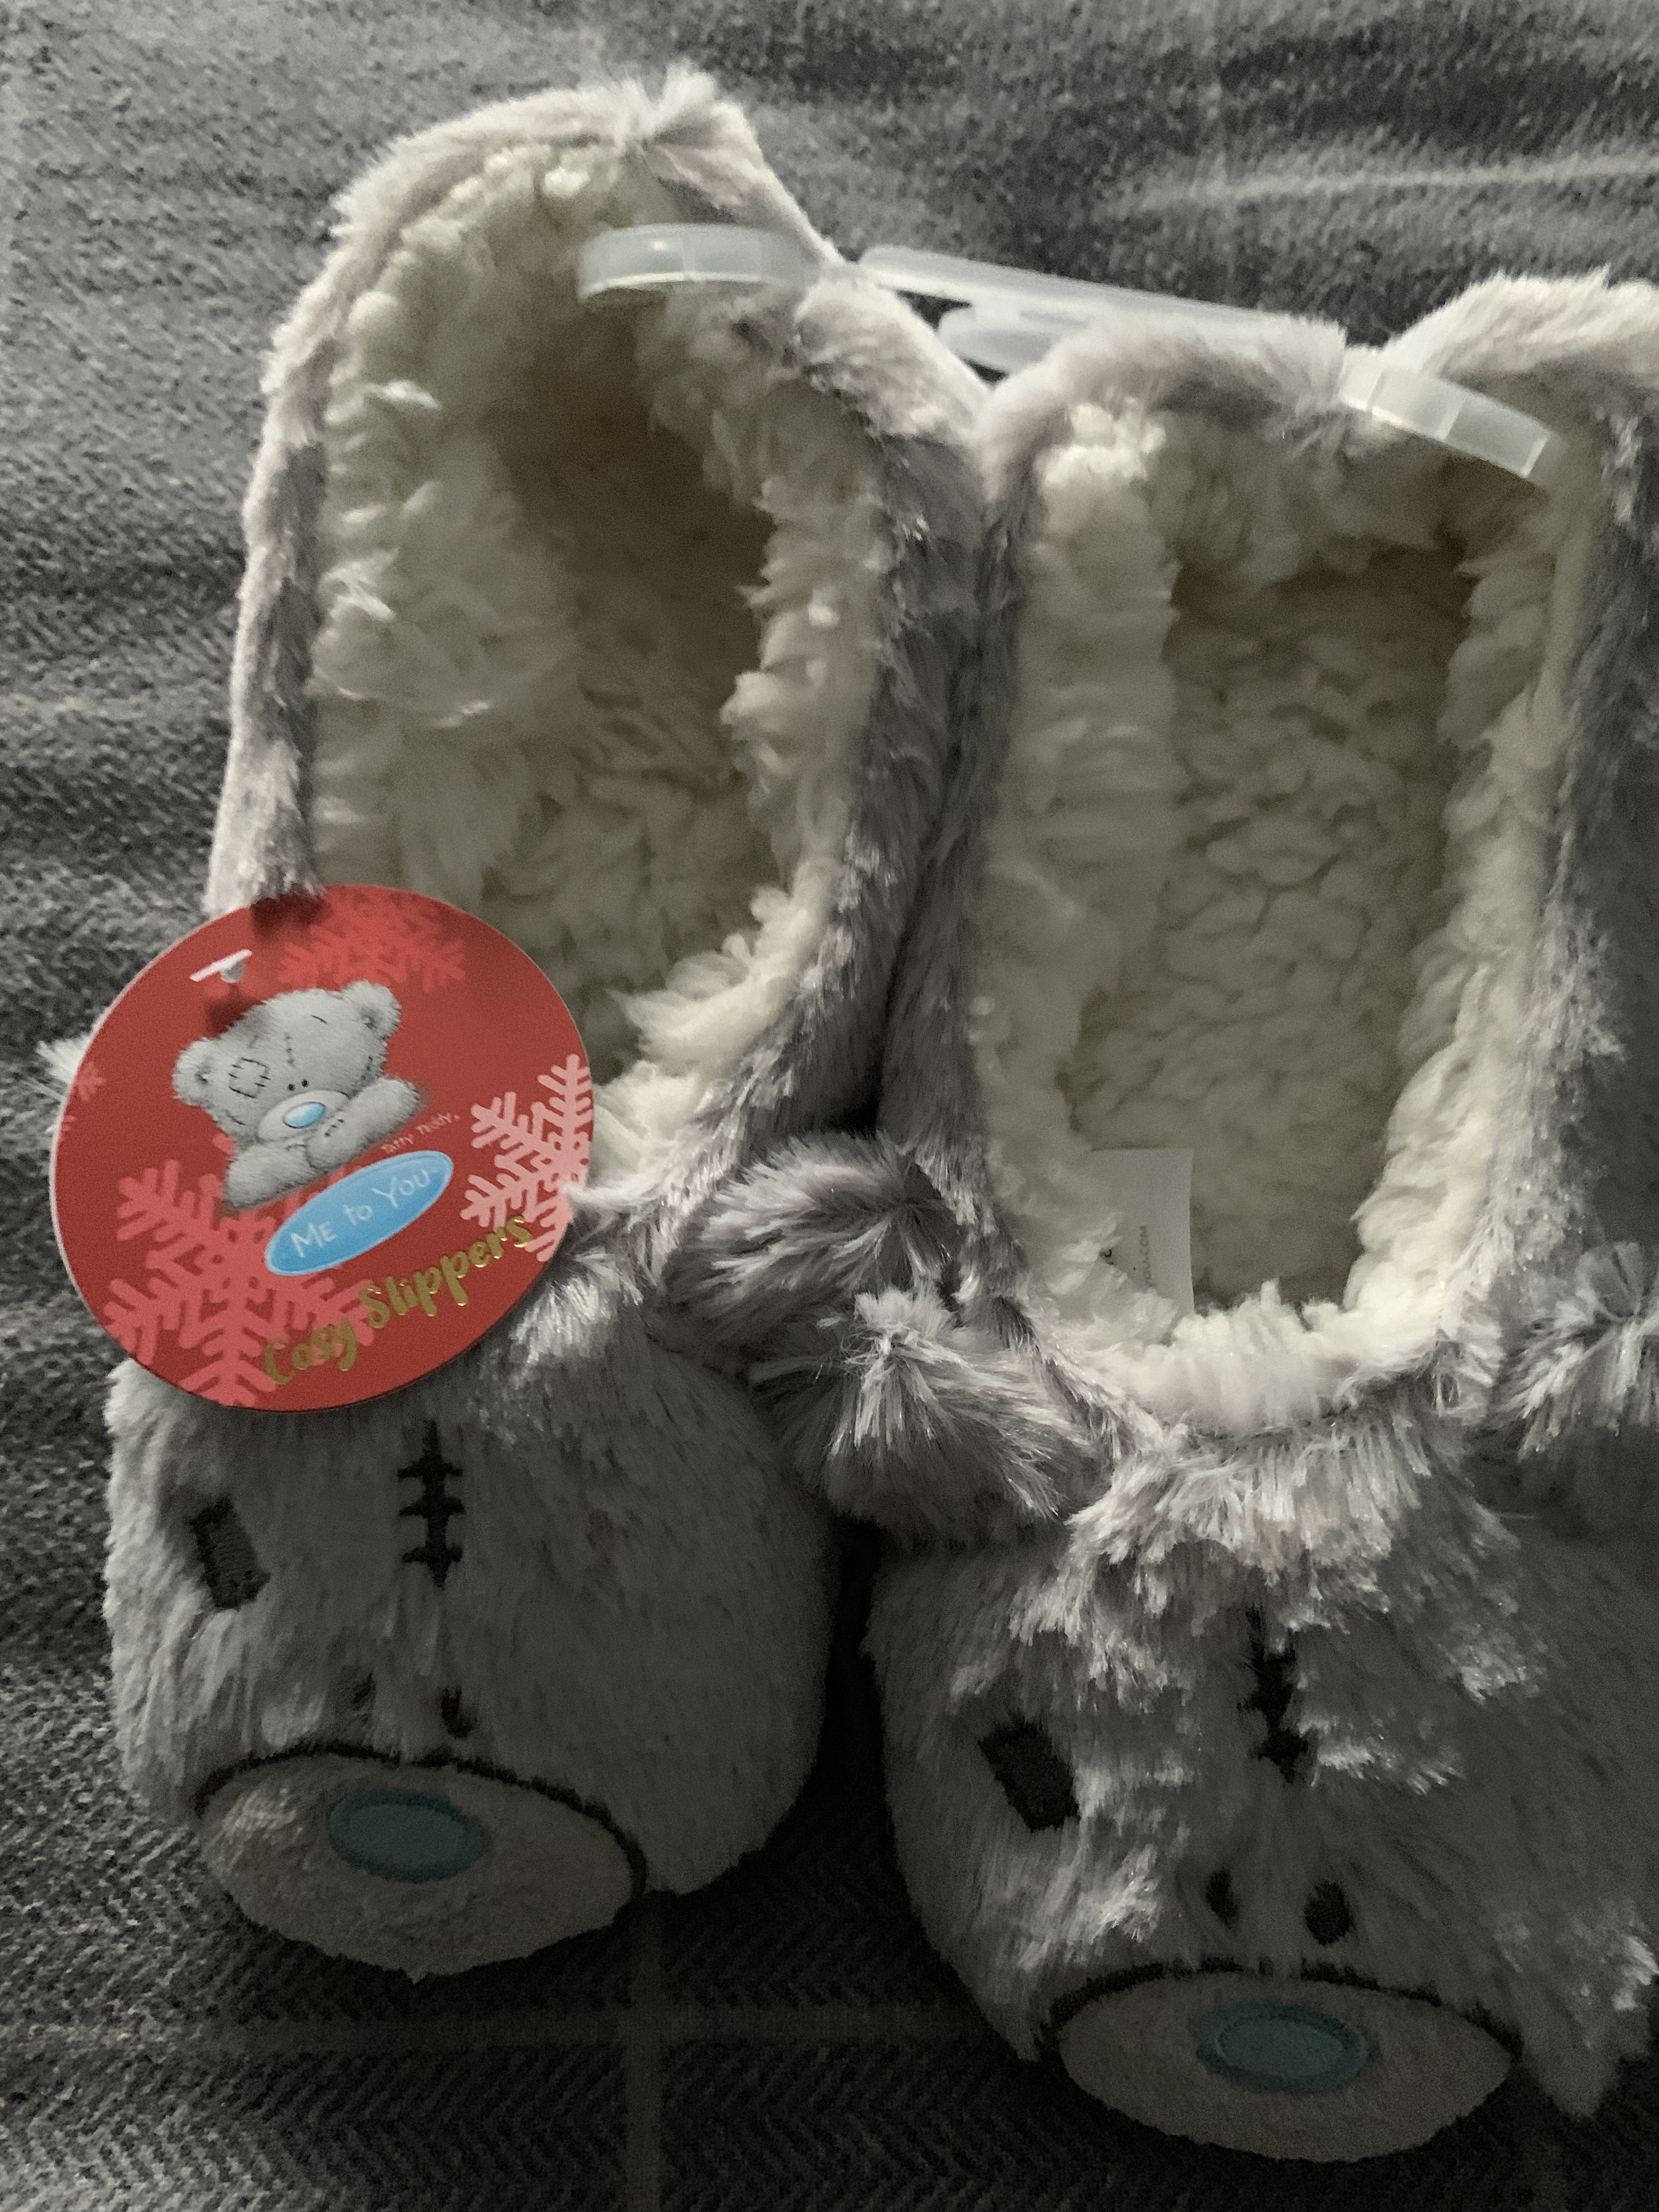 Tatty Teddy Me to You Slippers £4.99 